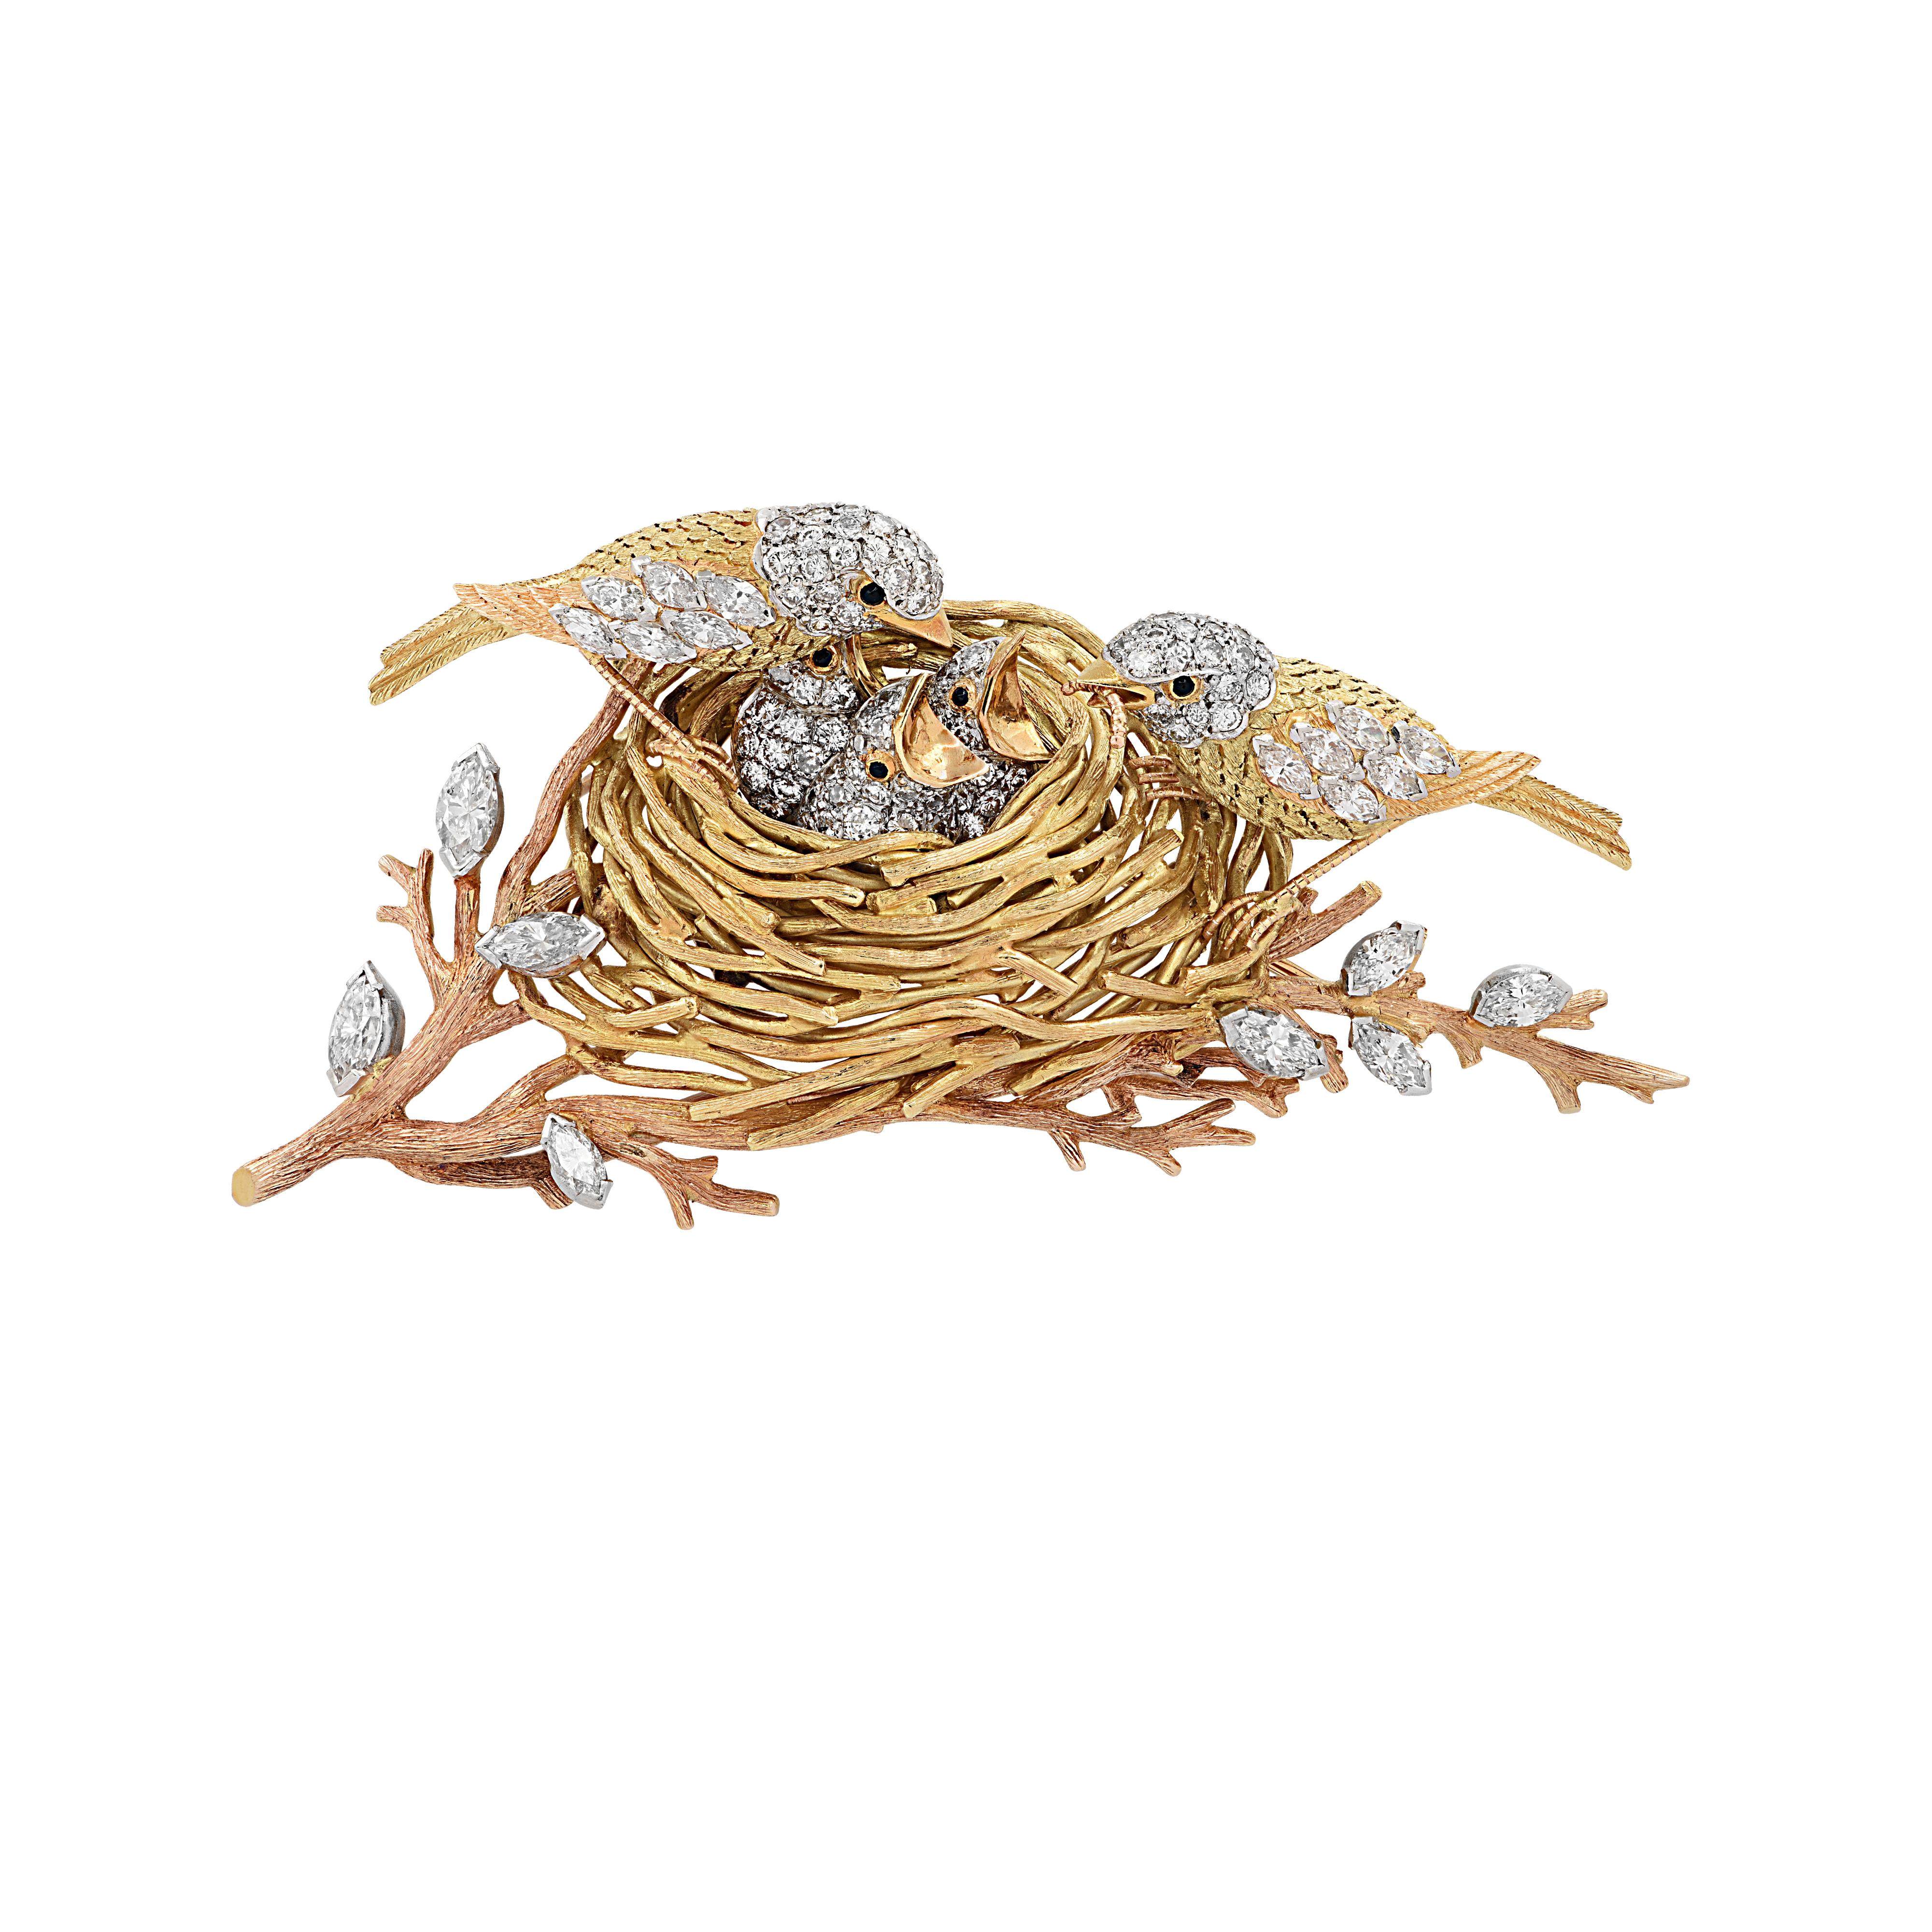 Enchanting Cartier brooch Pin crafted in 18 karat yellow gold and platinum, featuring 117 round brilliant cut and marquise cut diamonds weighing approximately 4.5 carats total, F color, VS clarity. This delightful brooch pin depicts a birds’ nest